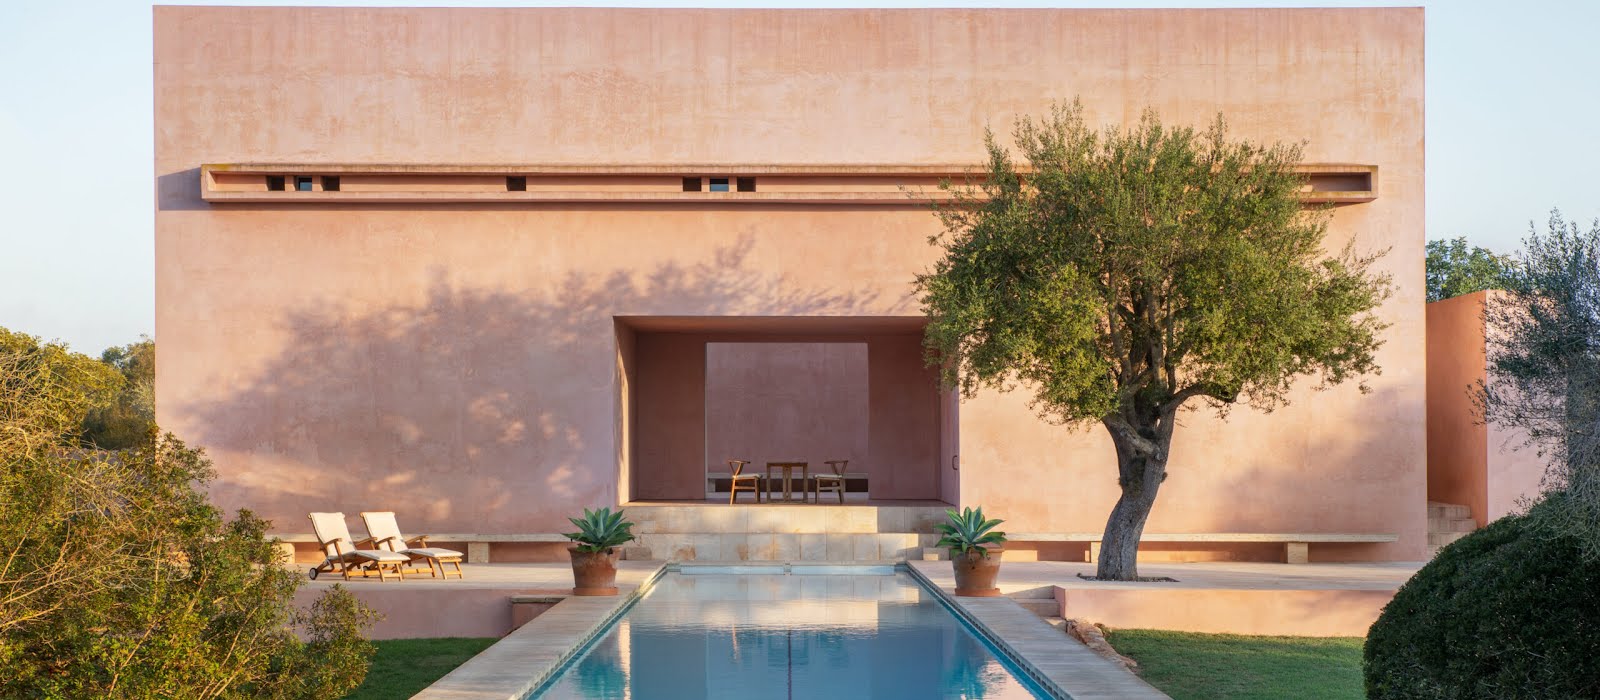 Dreaming of a holiday? Here are 6 destinations perfect for design lovers